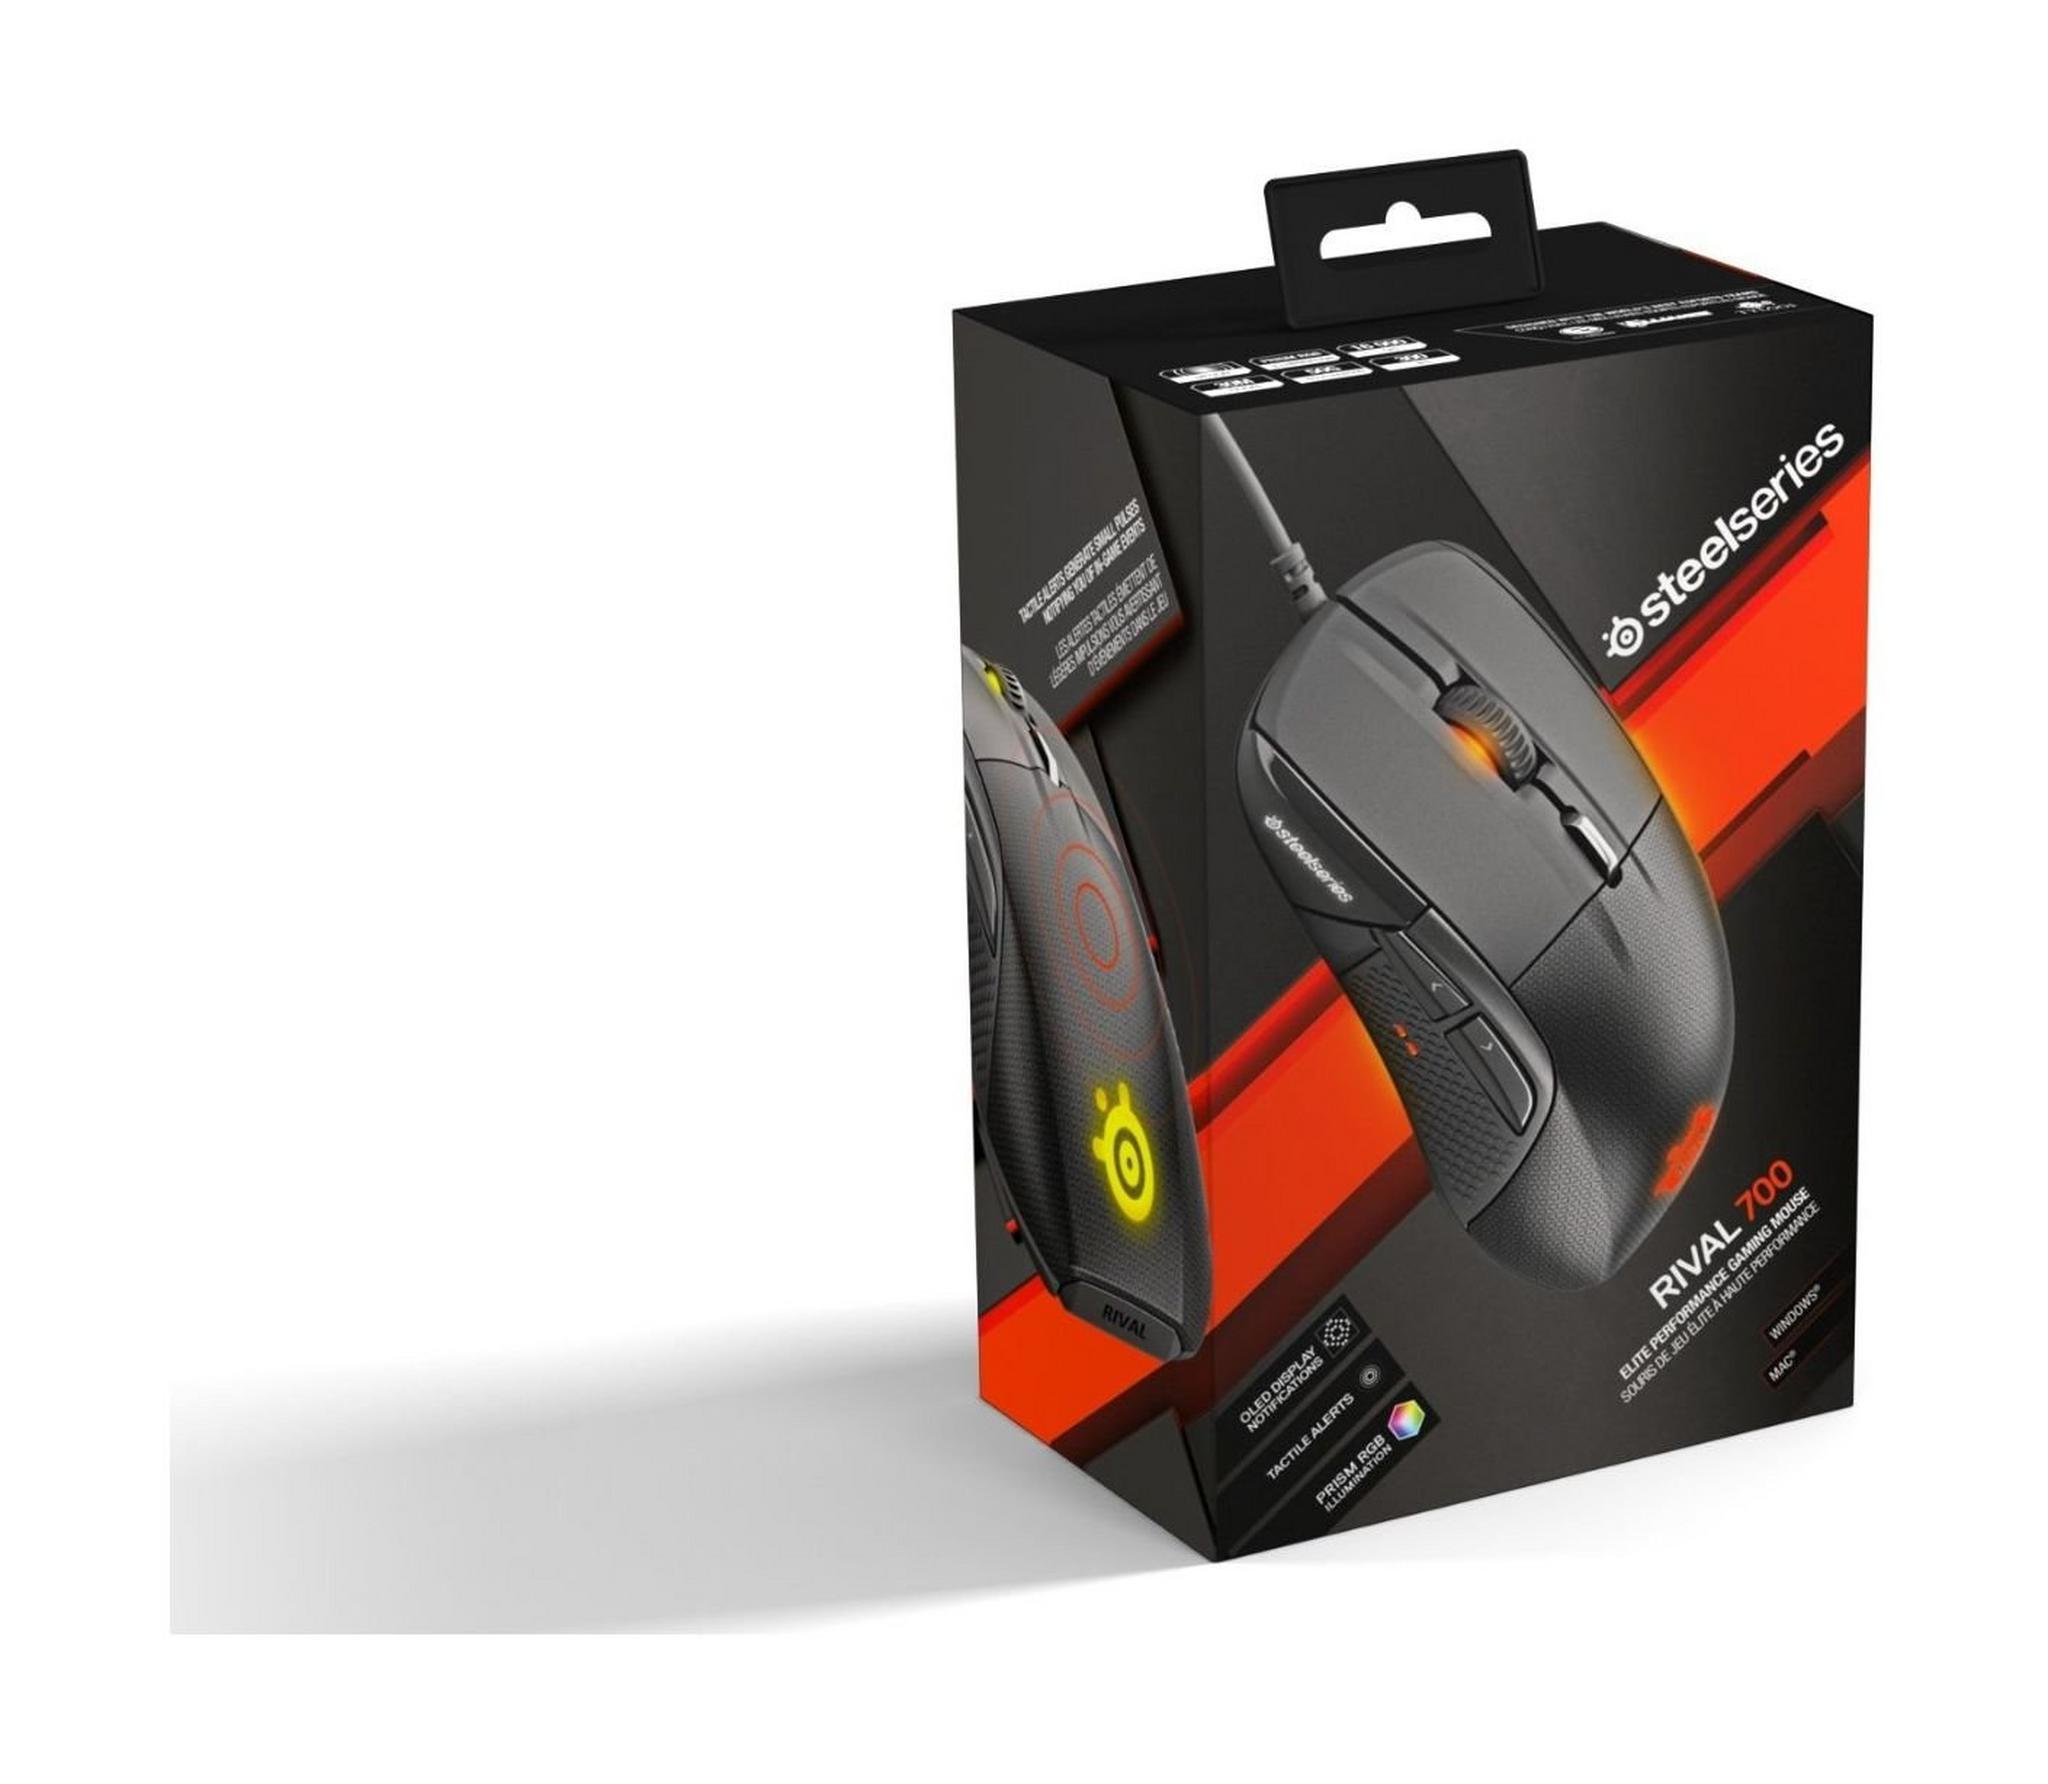 SteelSeries Rival 700 Optical Gaming Mouse - Black